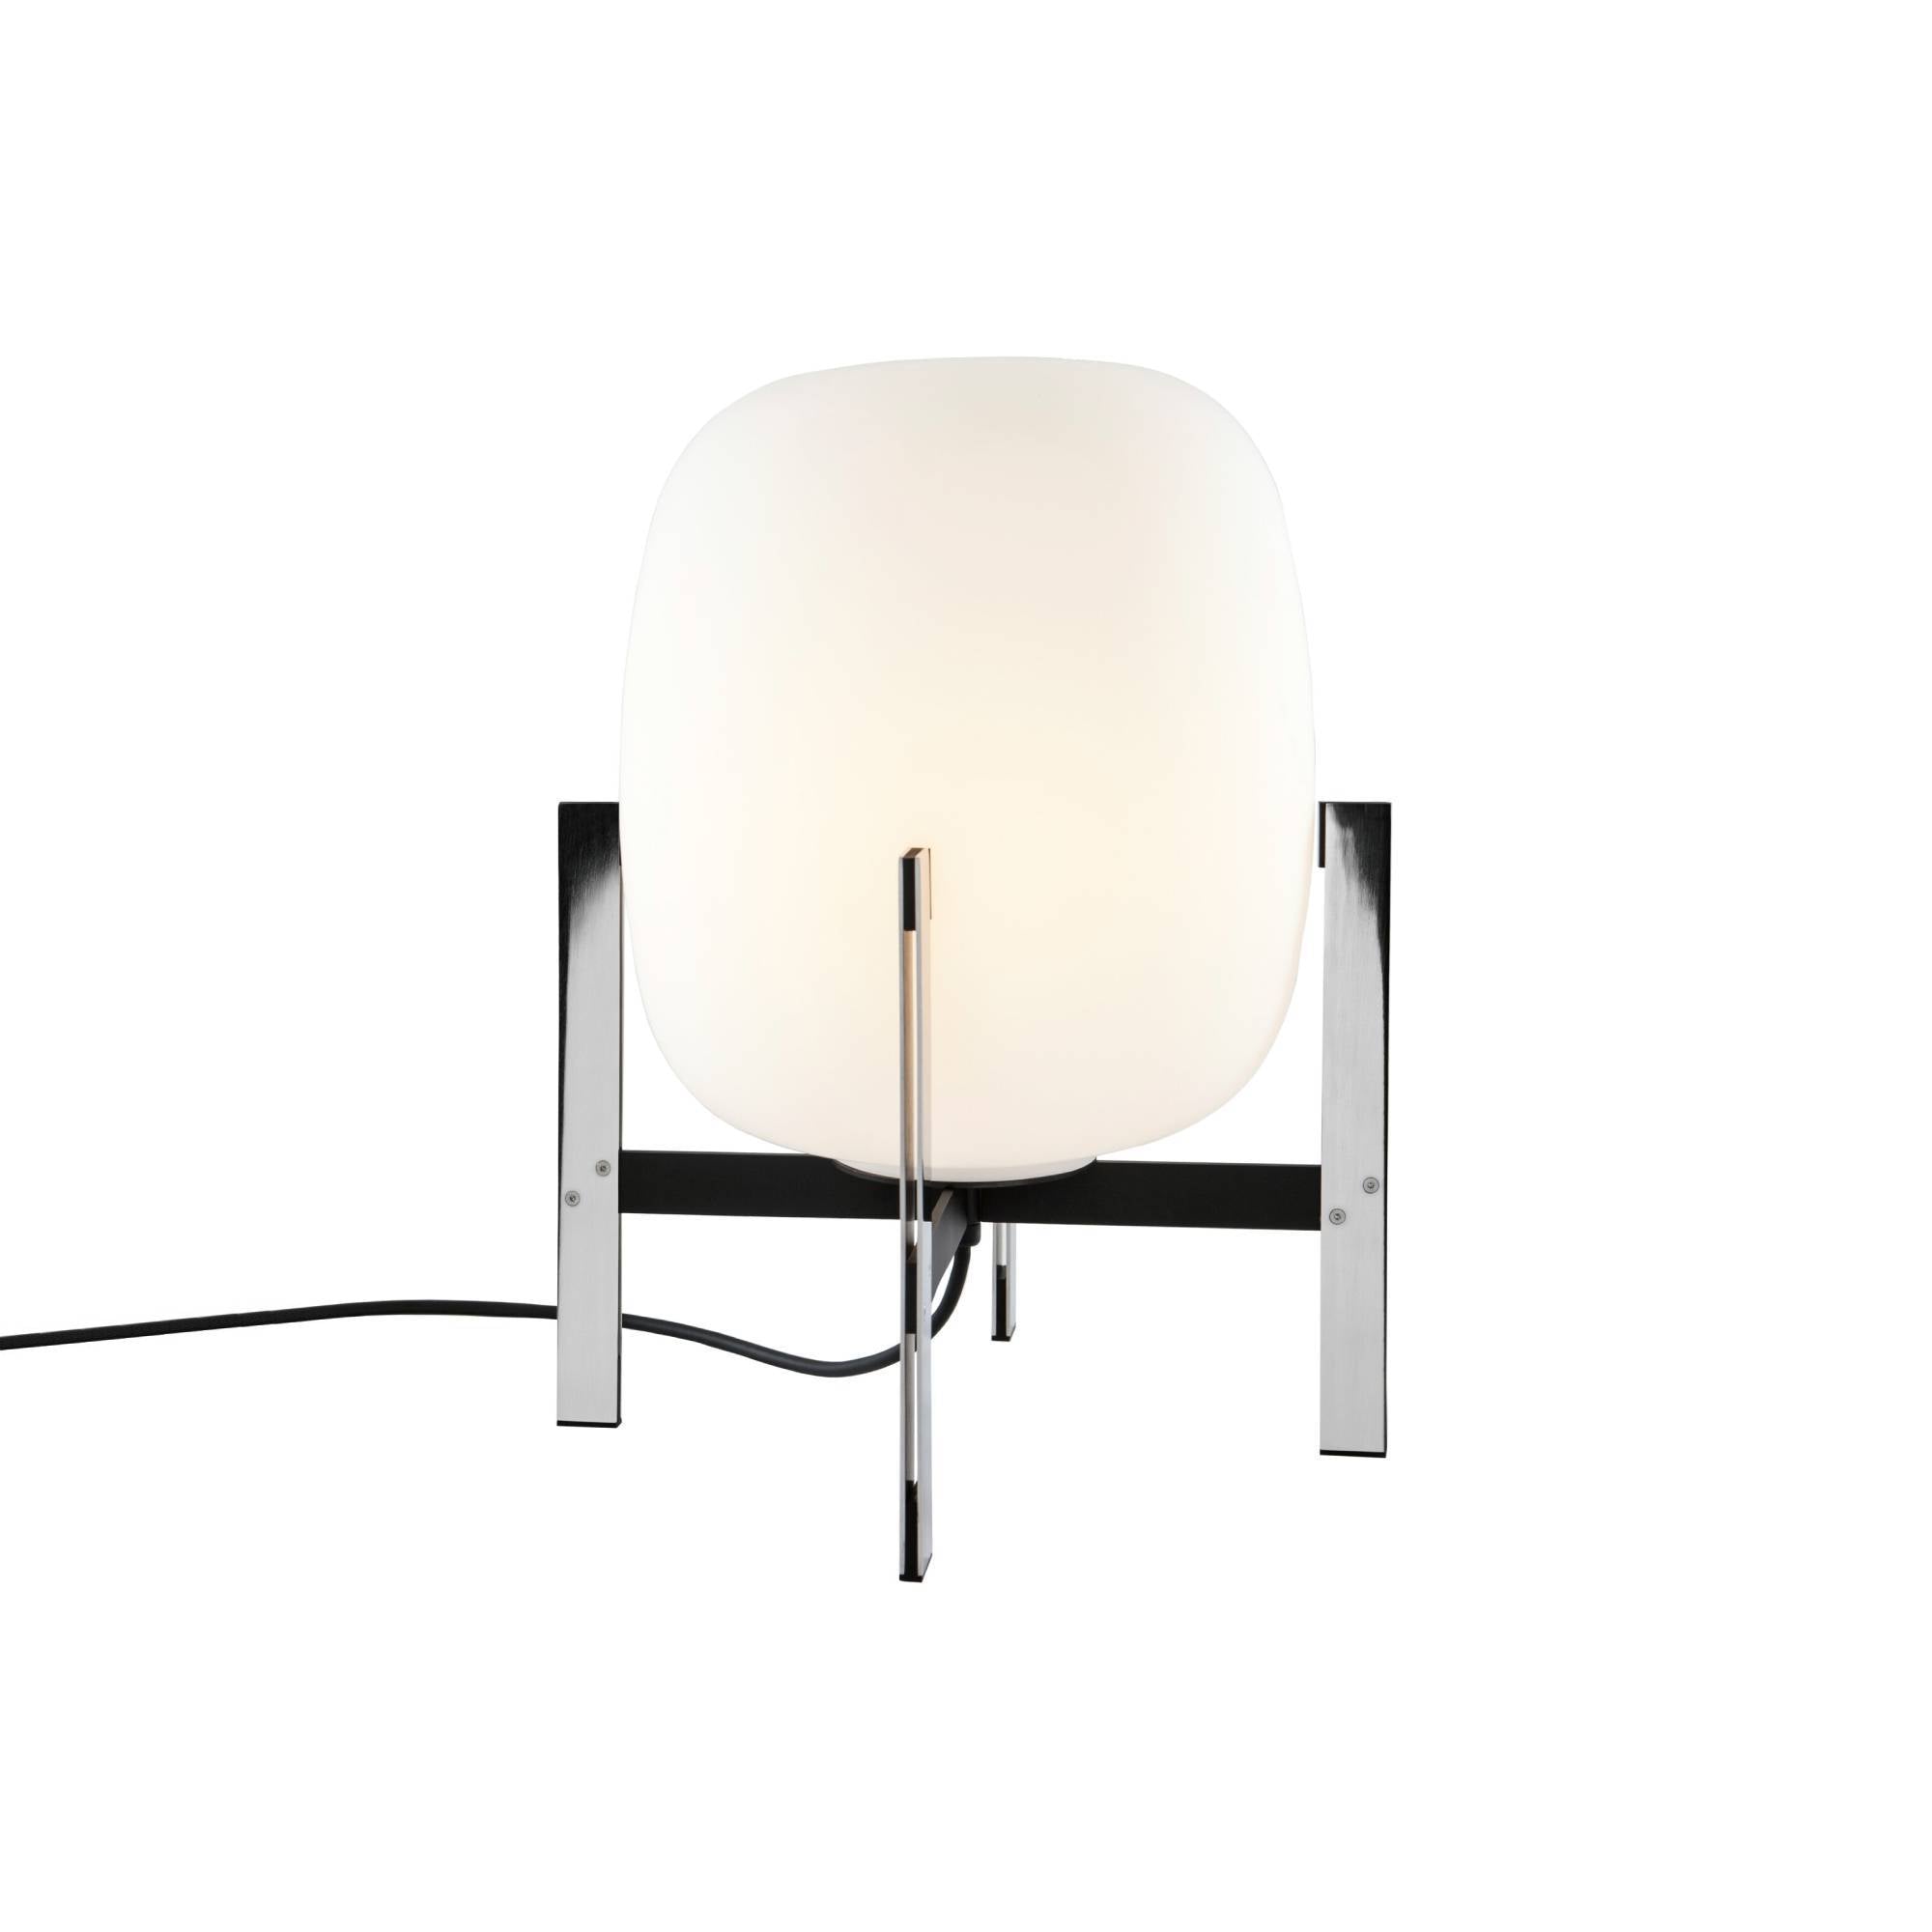 Cesta Metálica Table Lamp: Without Handle